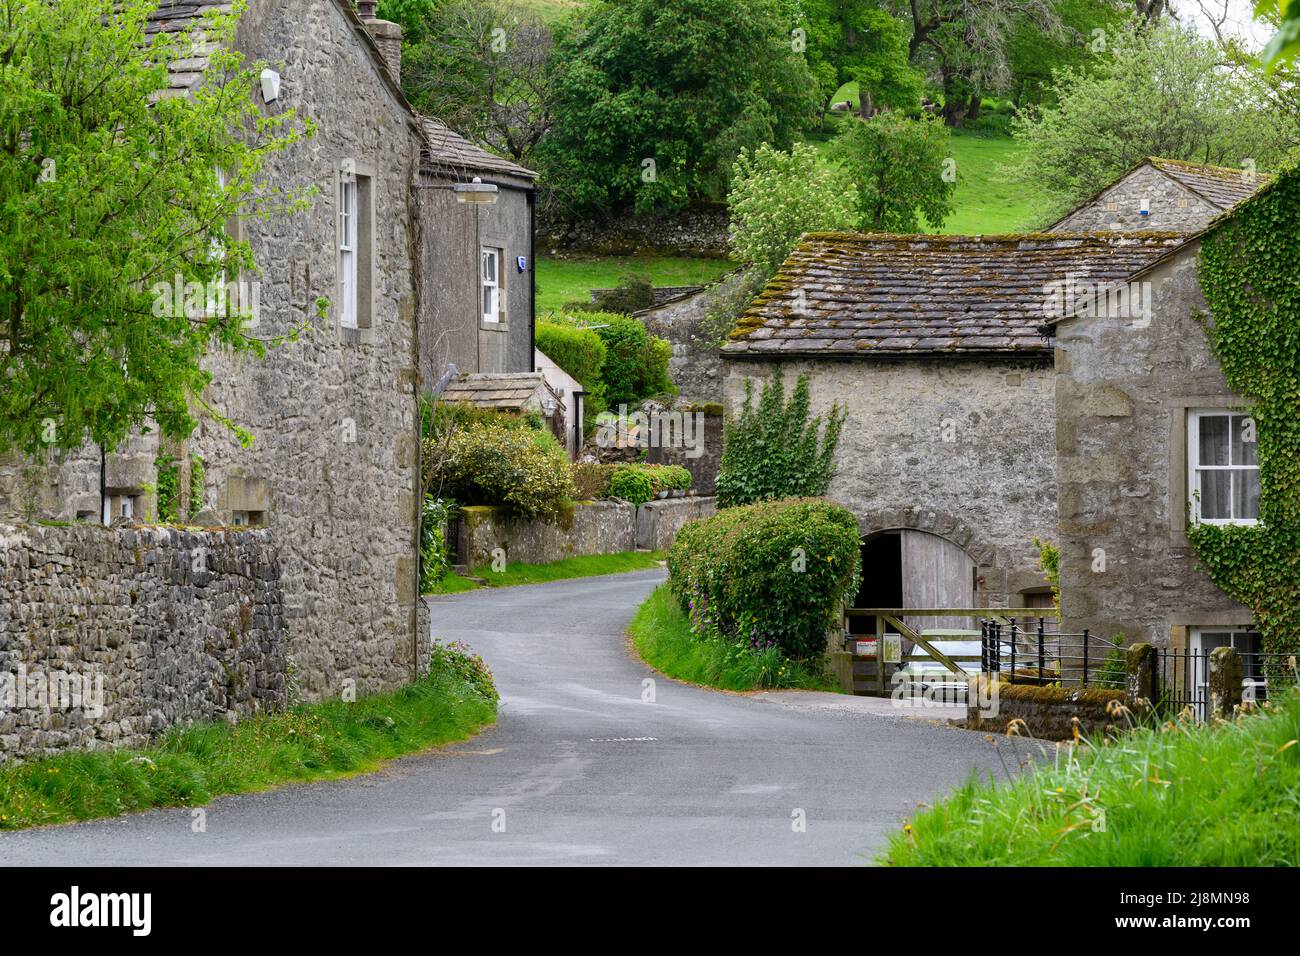 Quiet Conistone village (attractive stone buildings, green fields on steep valley hillside, winding road) - Wharfedale, Yorkshire Dales, England, UK. Stock Photo